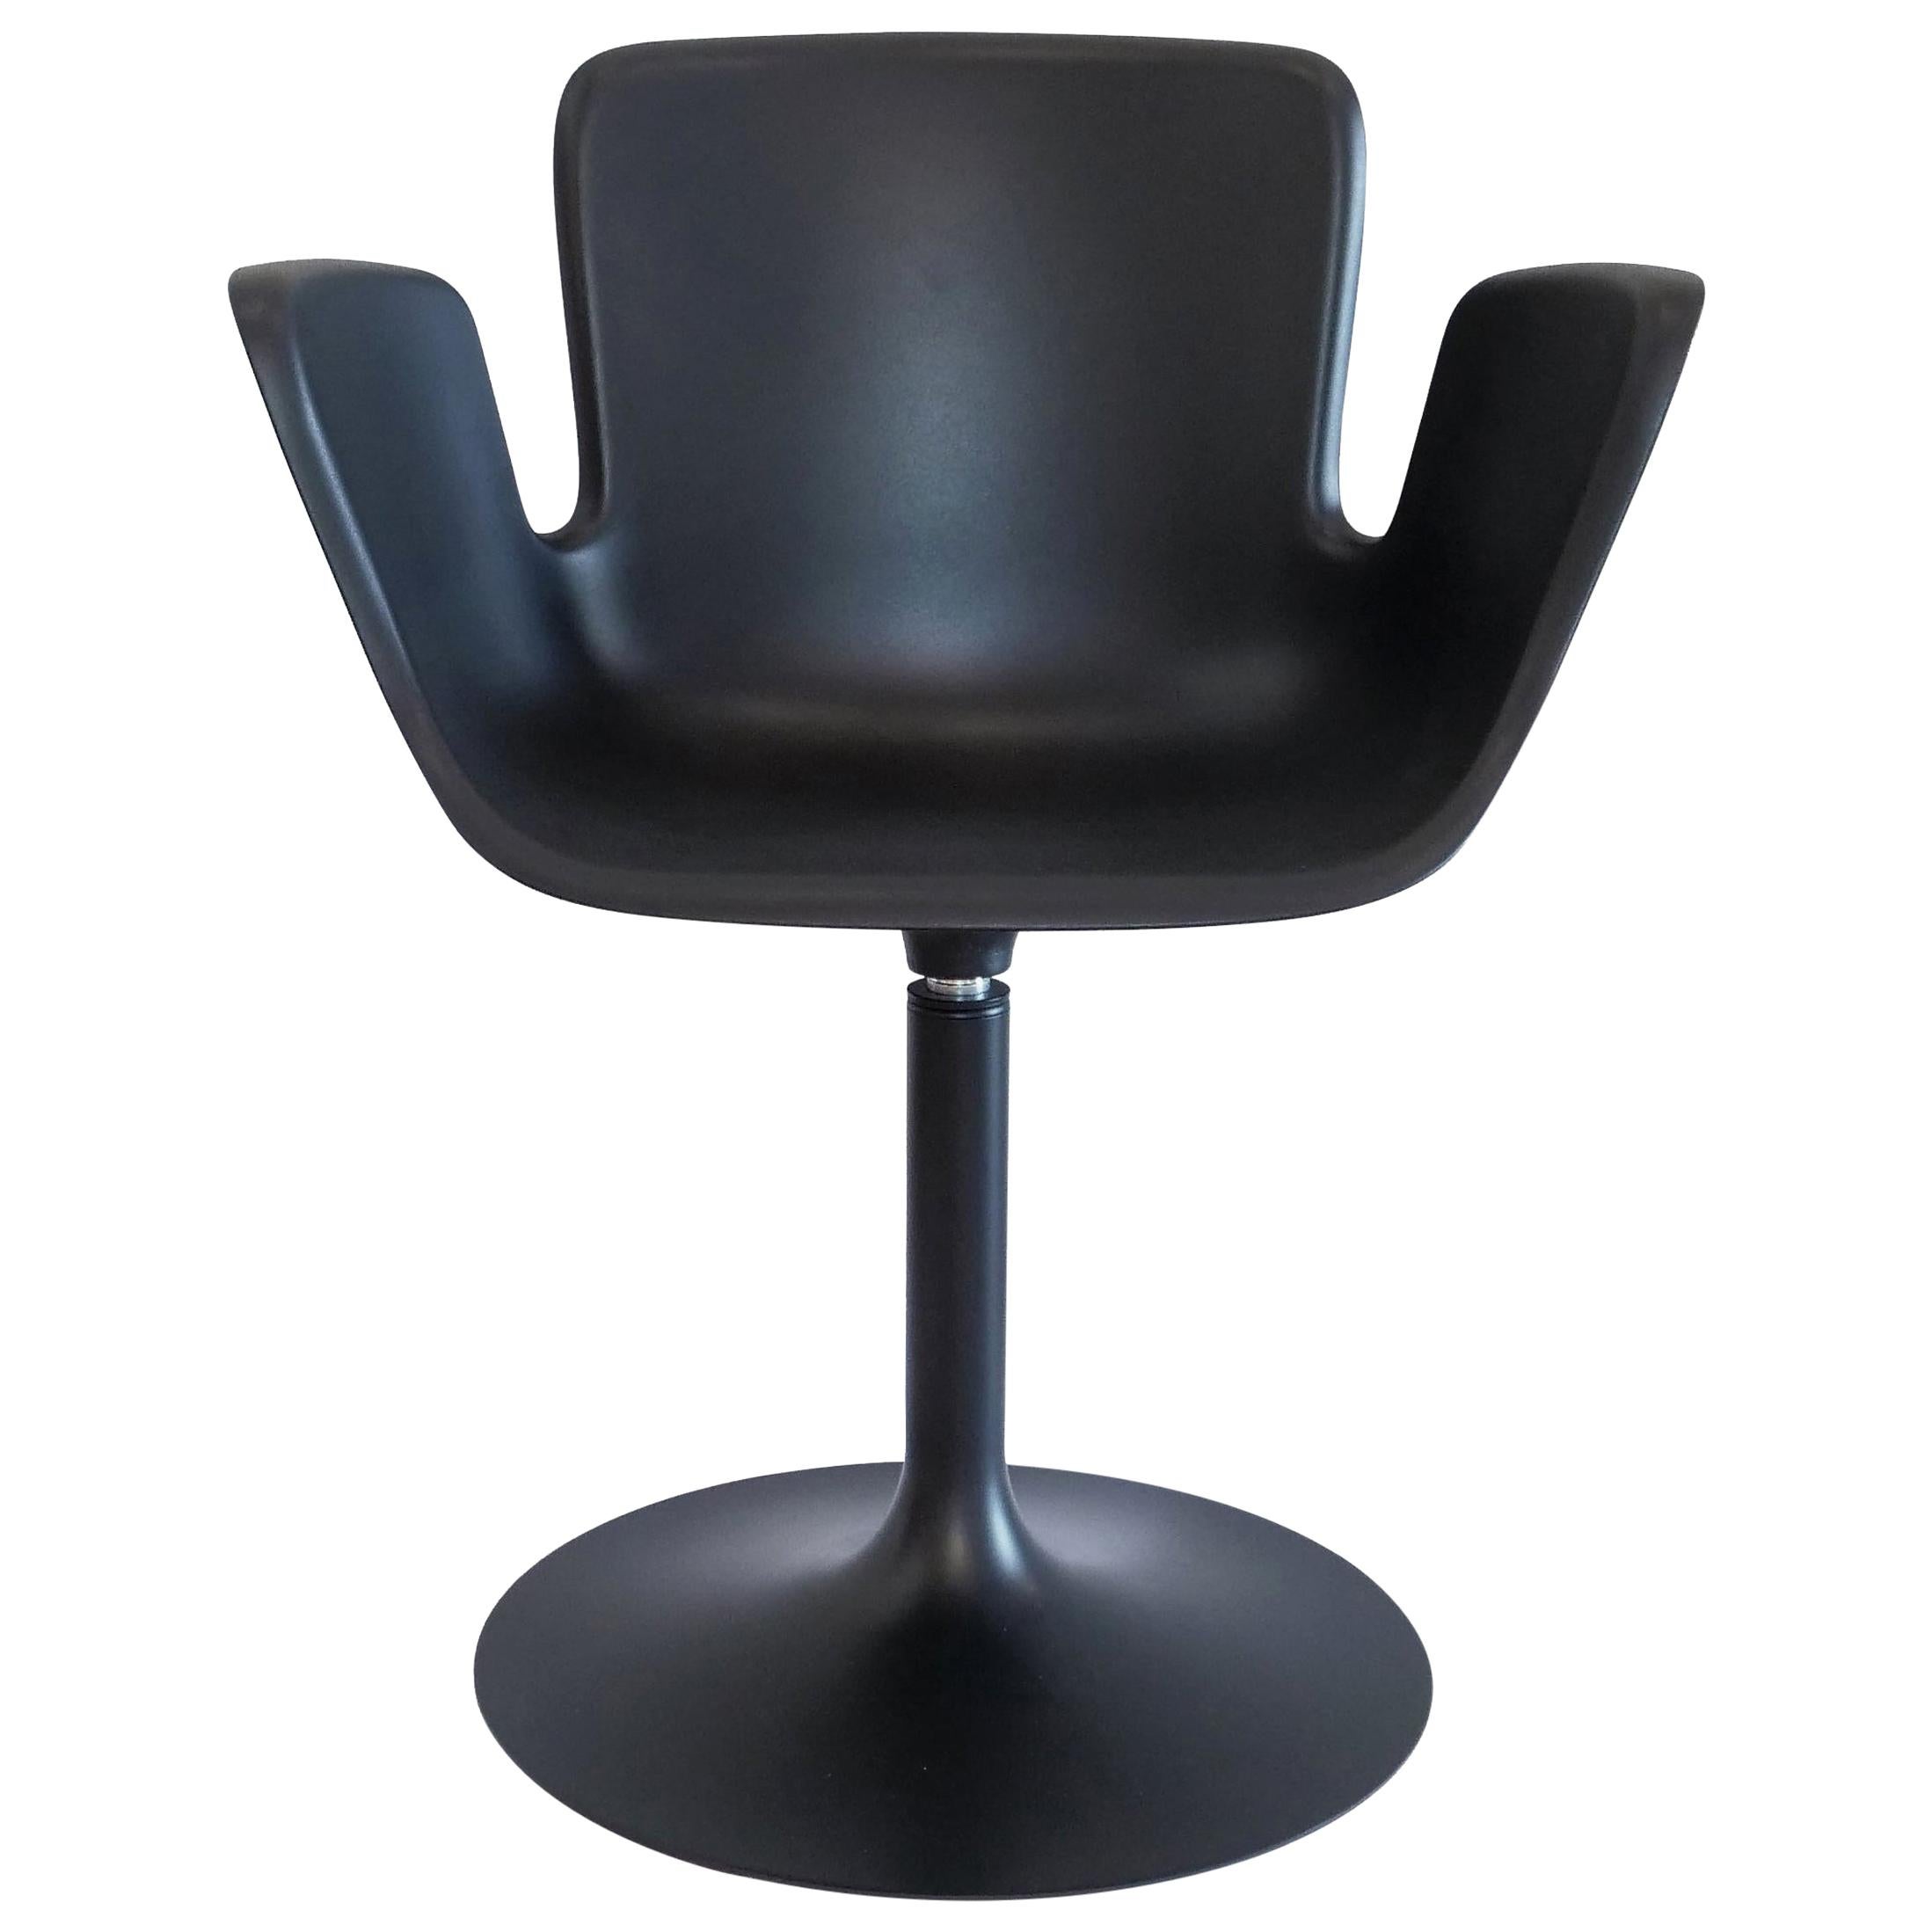 Werner Aisslinger Juli Plastic Chair in Anthracite Metal Base by Cappellini